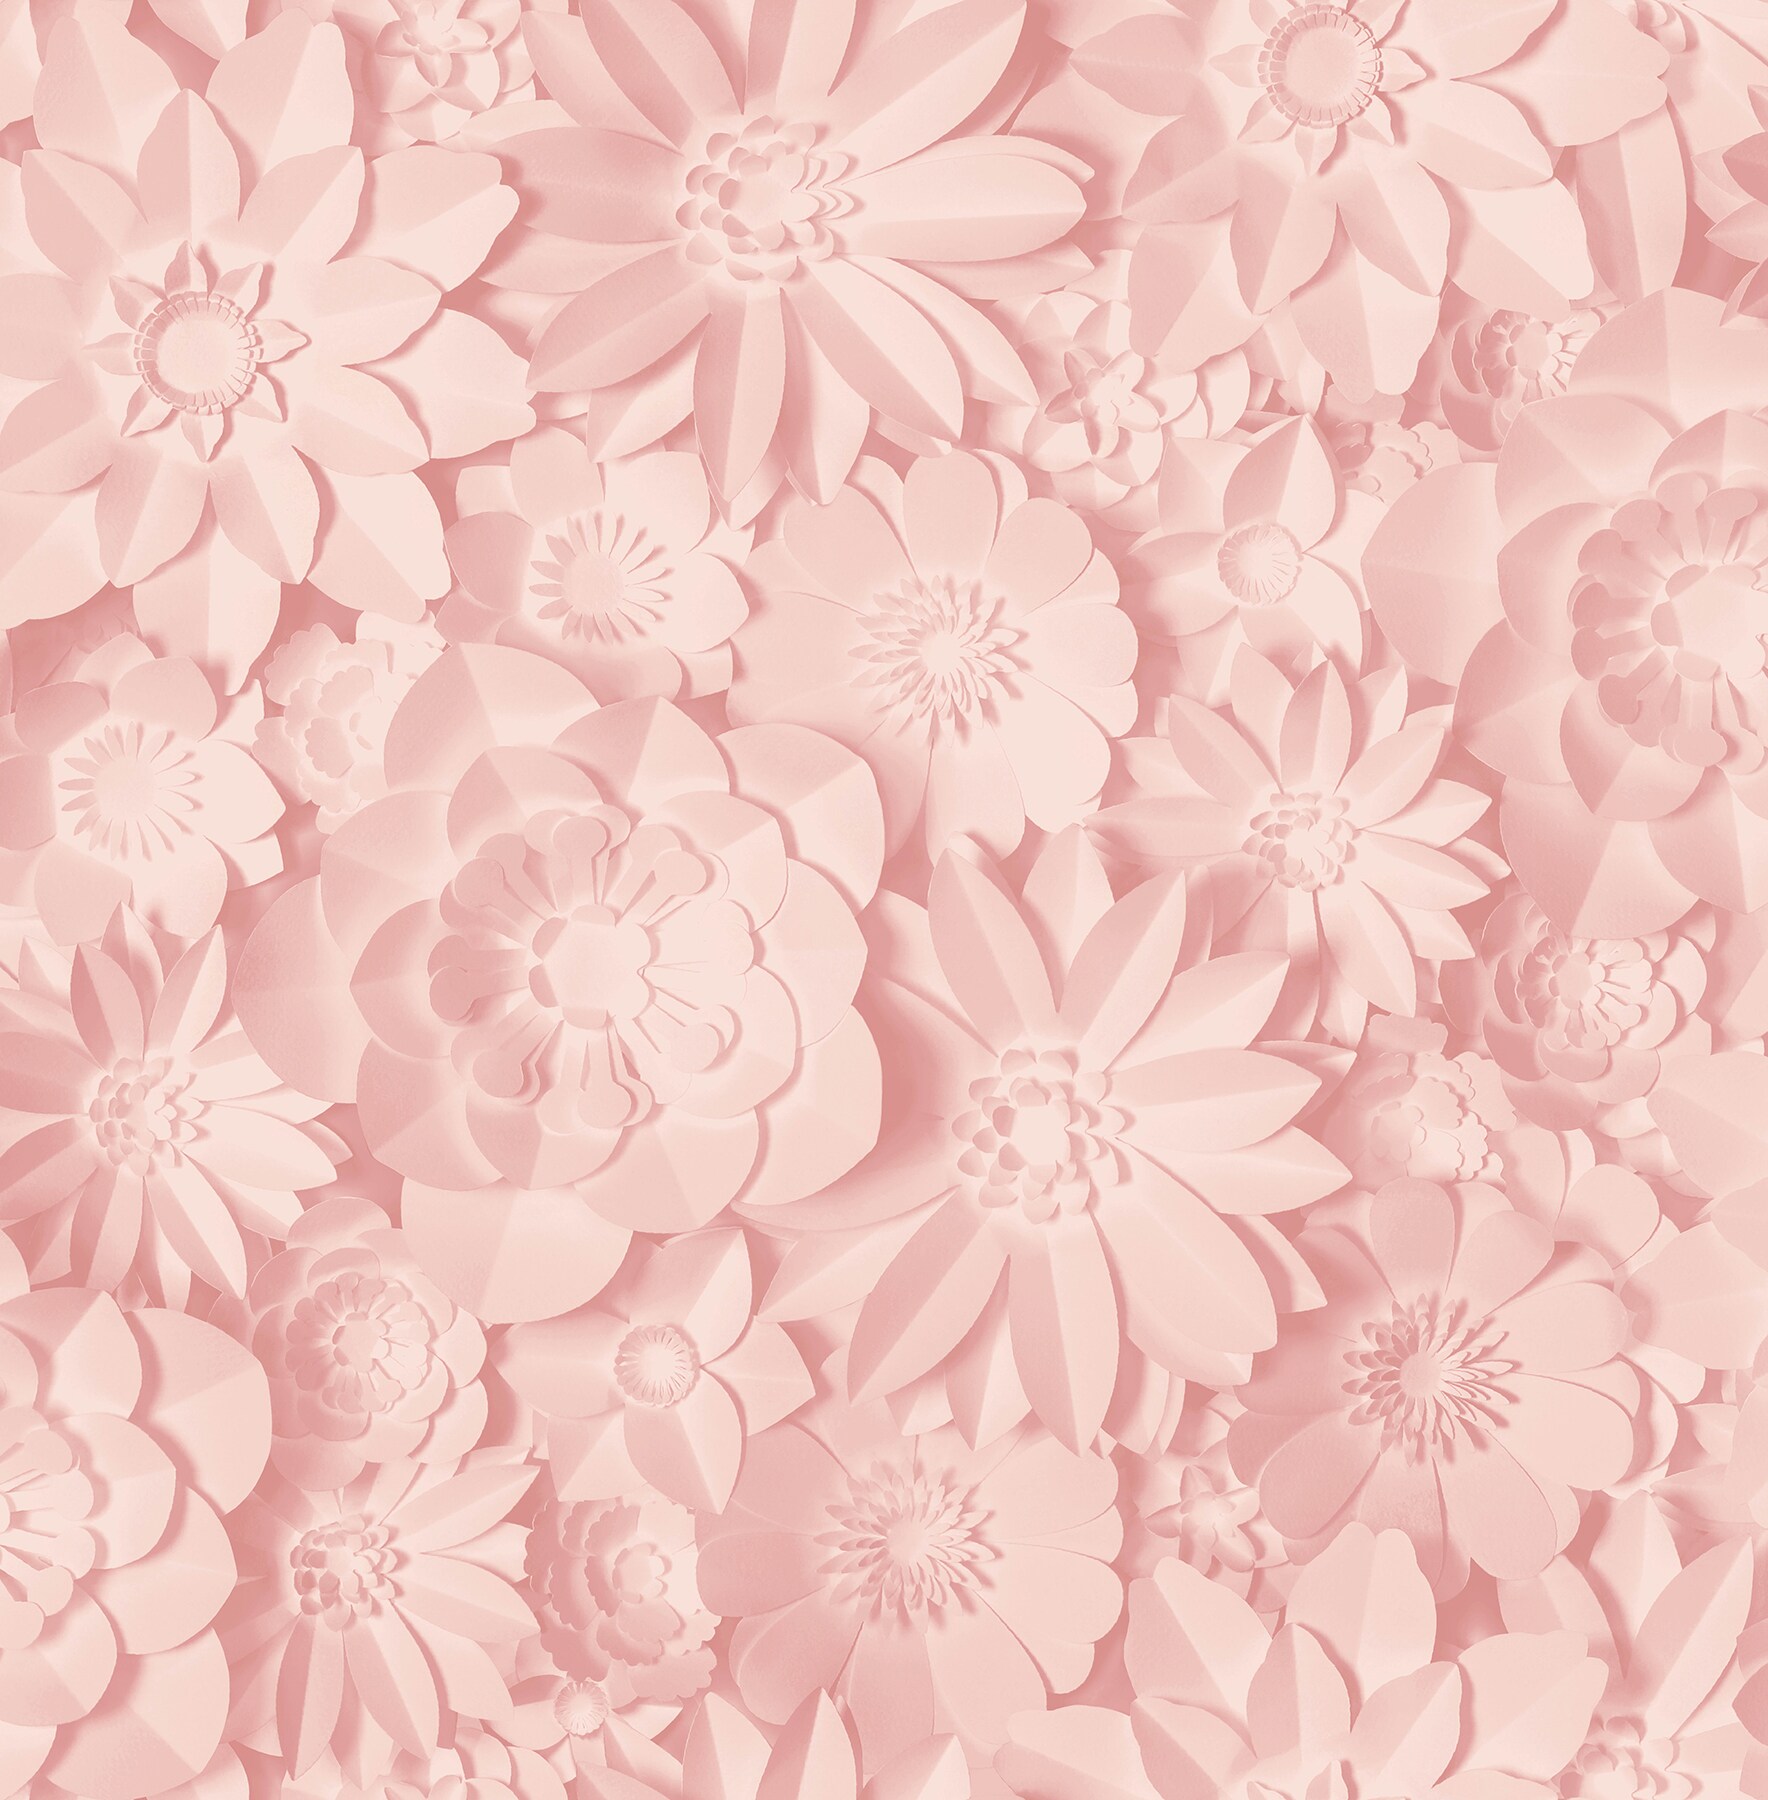 Crosby Pink Floral Paper Strippable Roll Wallpaper (Covers 56.4 sq. ft.)